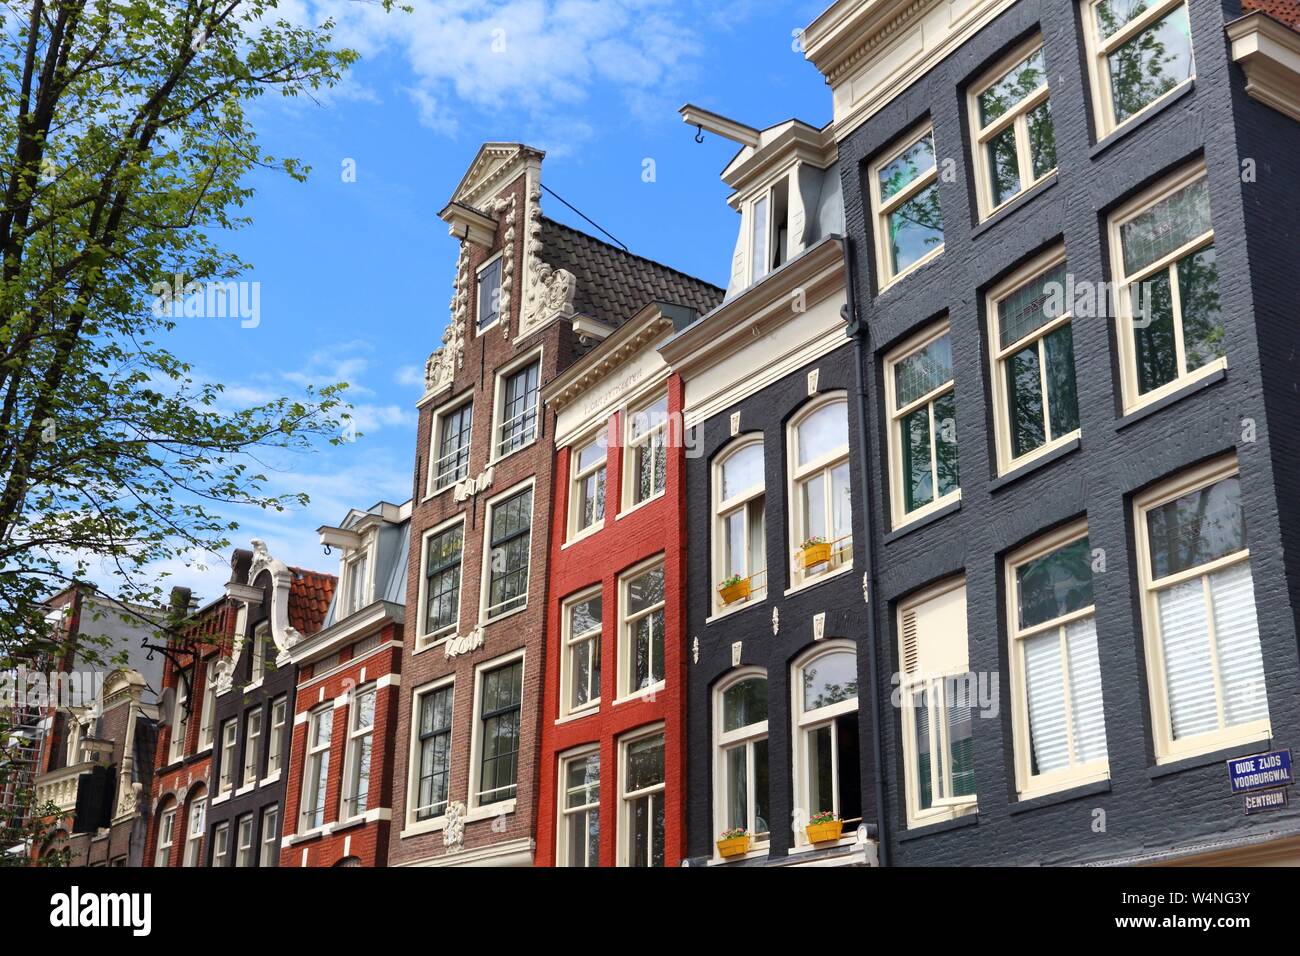 Amsterdam city architecture - Oudezijds Voorburgwal street residential buildings. Netherlands rowhouse. Stock Photo